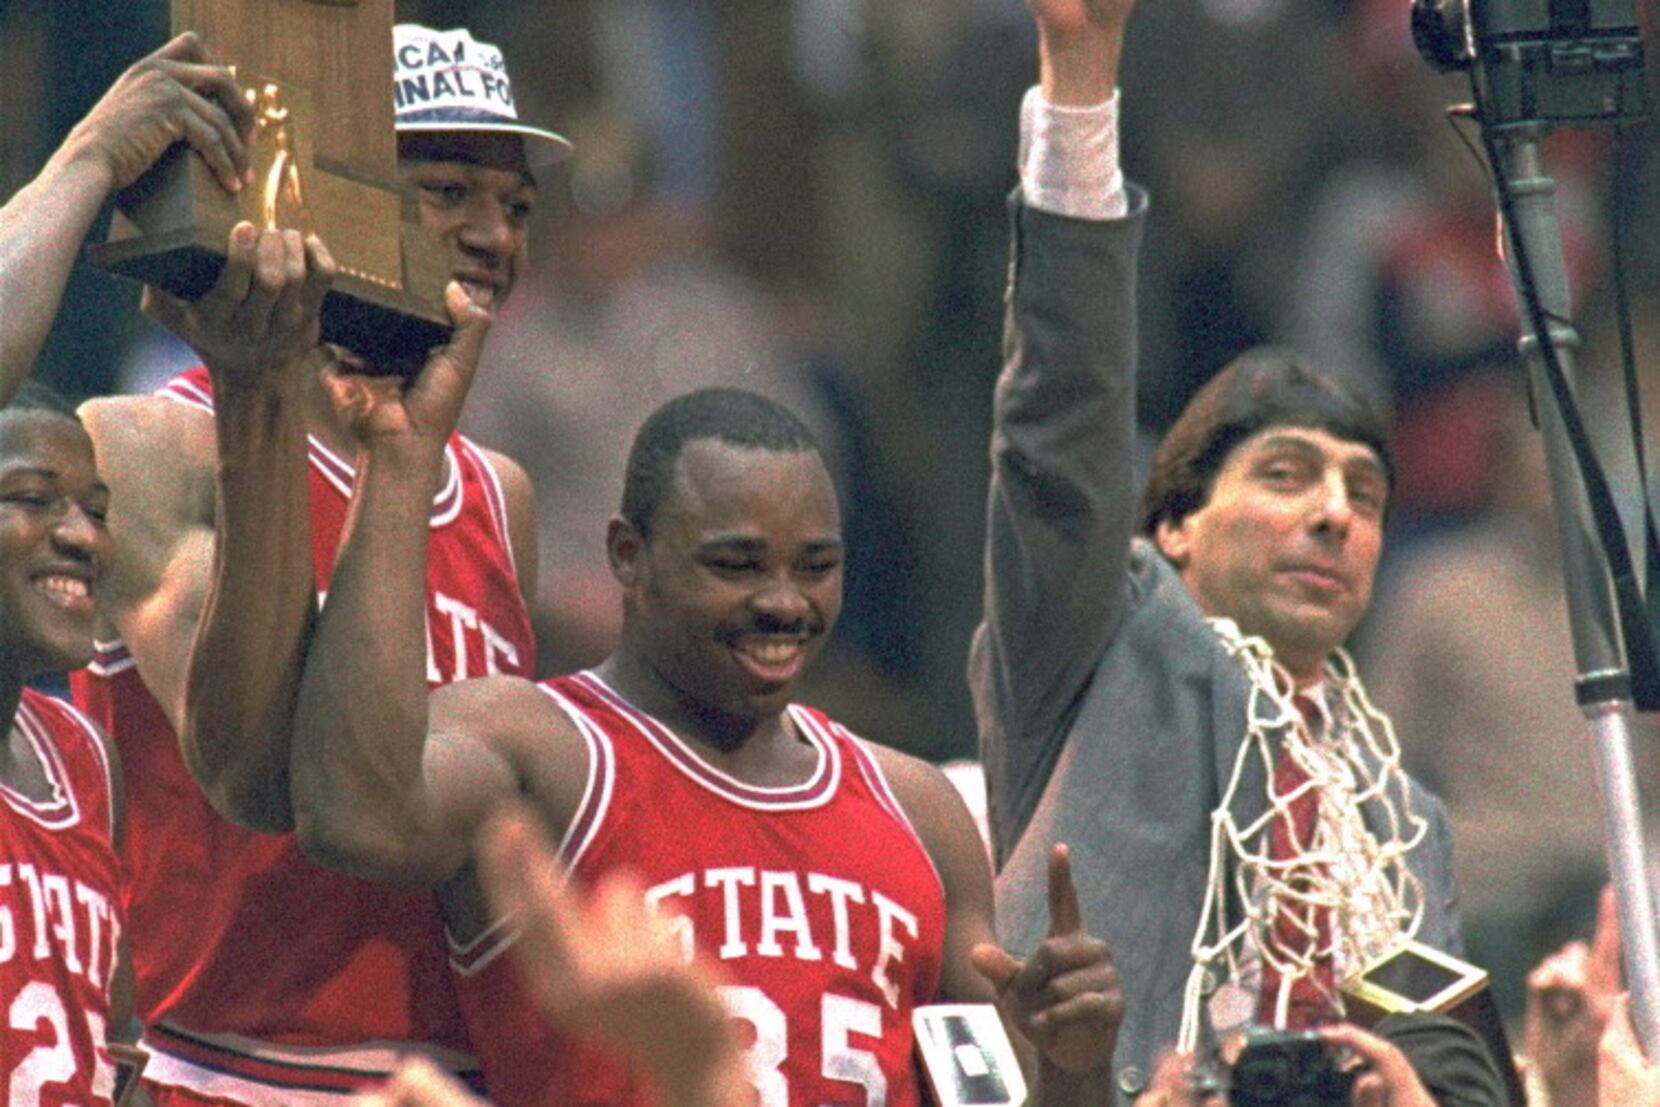 On this day in history, March 29, 1982, Michael Jordan hits winning shot in  NCAA final, launching legend